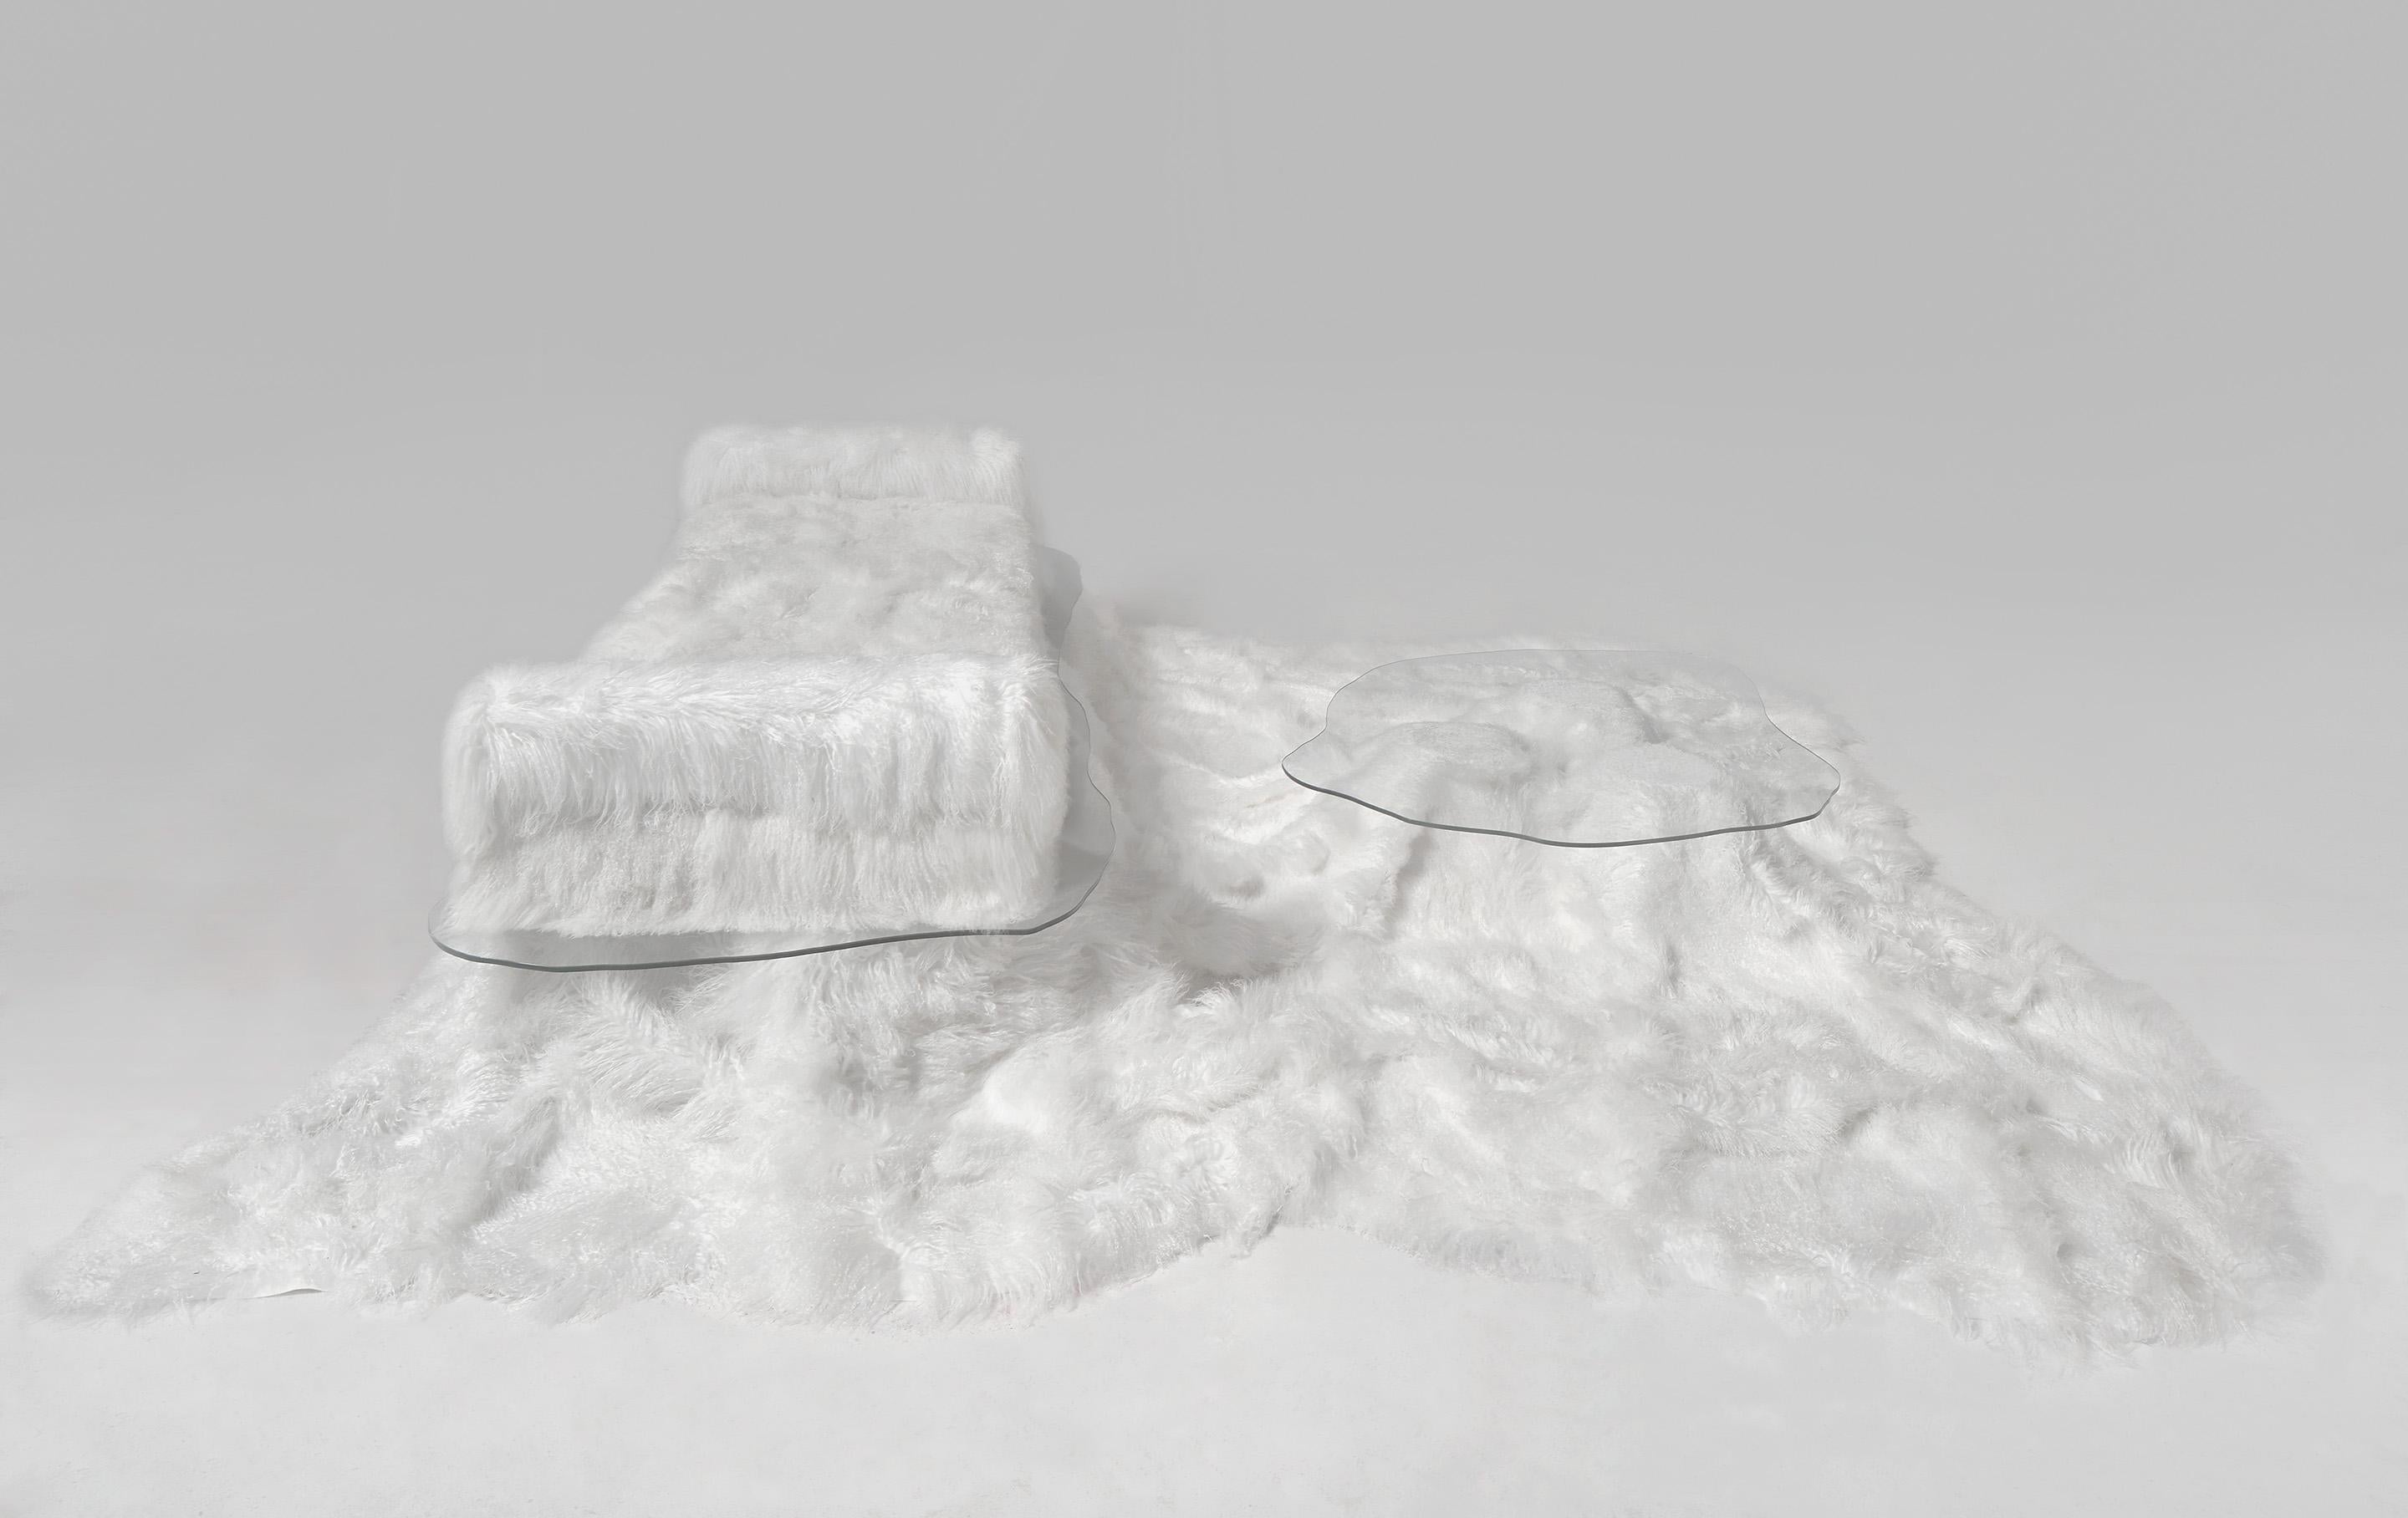 Guillermo Santomà

Bed carpet table
Manufactured by Guillermo Santomá
Edition side gallary
Barcelona, 2018
Tibetan sheep fur, porex, glass, iron structure

Measurements
373 cm x 354 cm x 69 H cm.
146.85 in x 139.37 in x 27.16 H